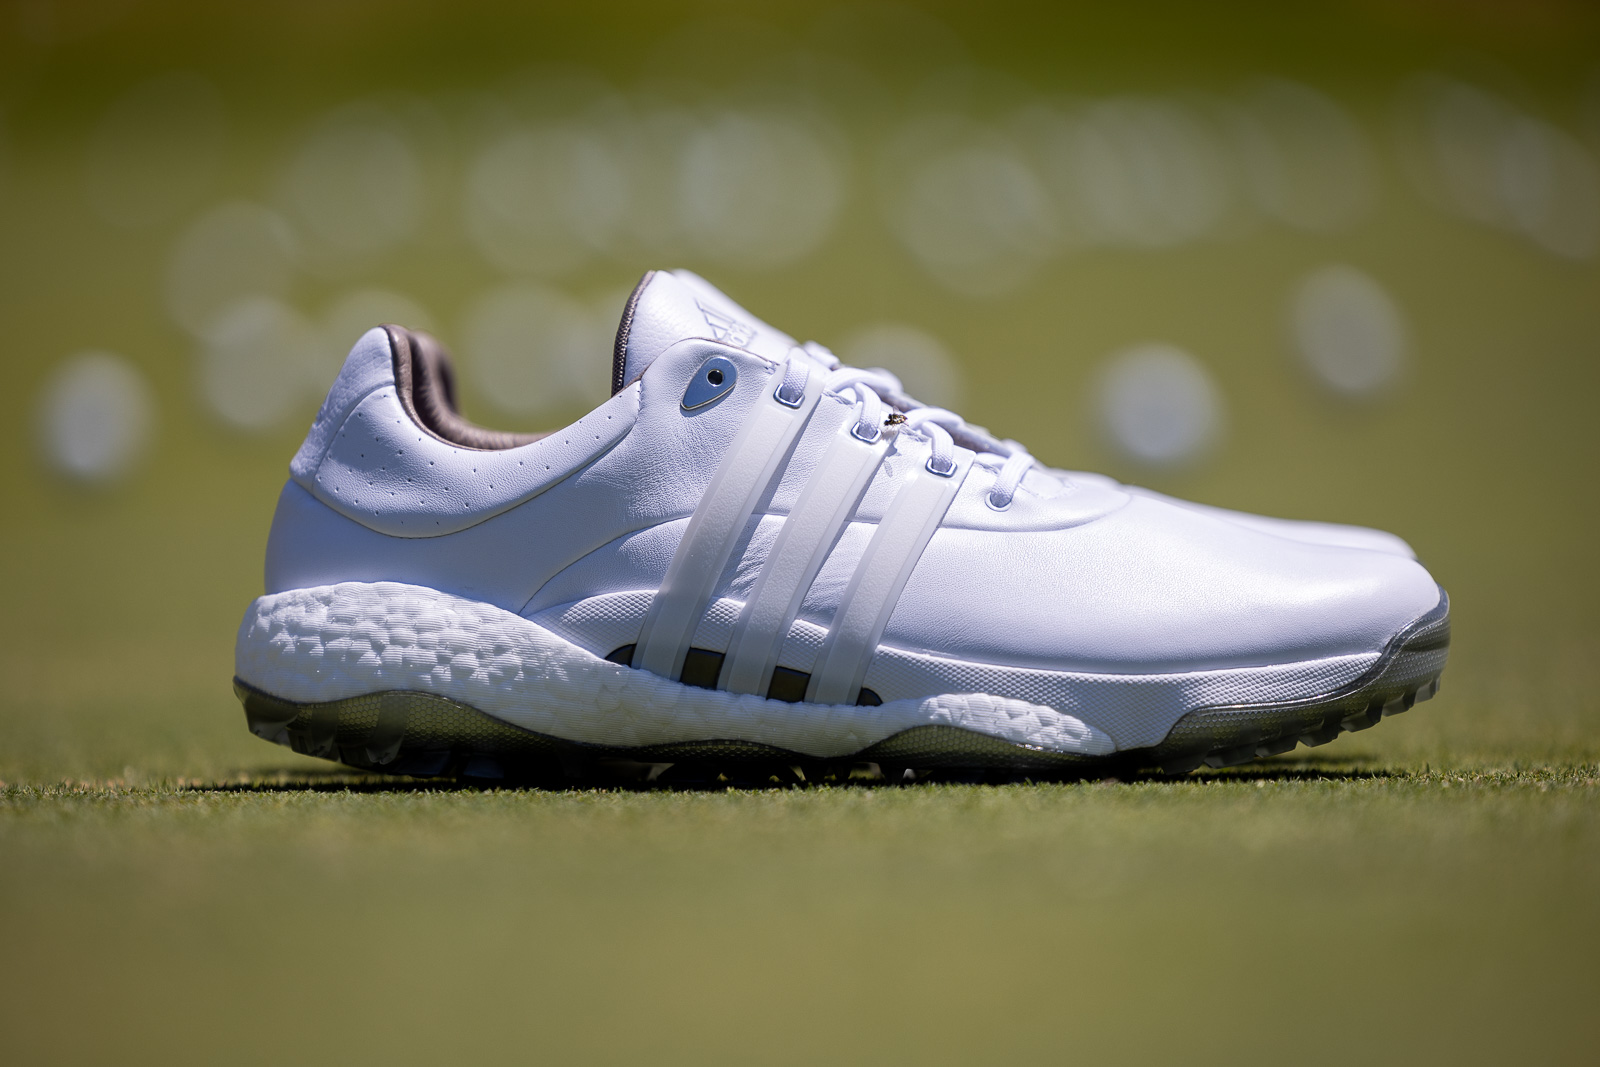 First Look: adidas Ultraboost Golf Shoes